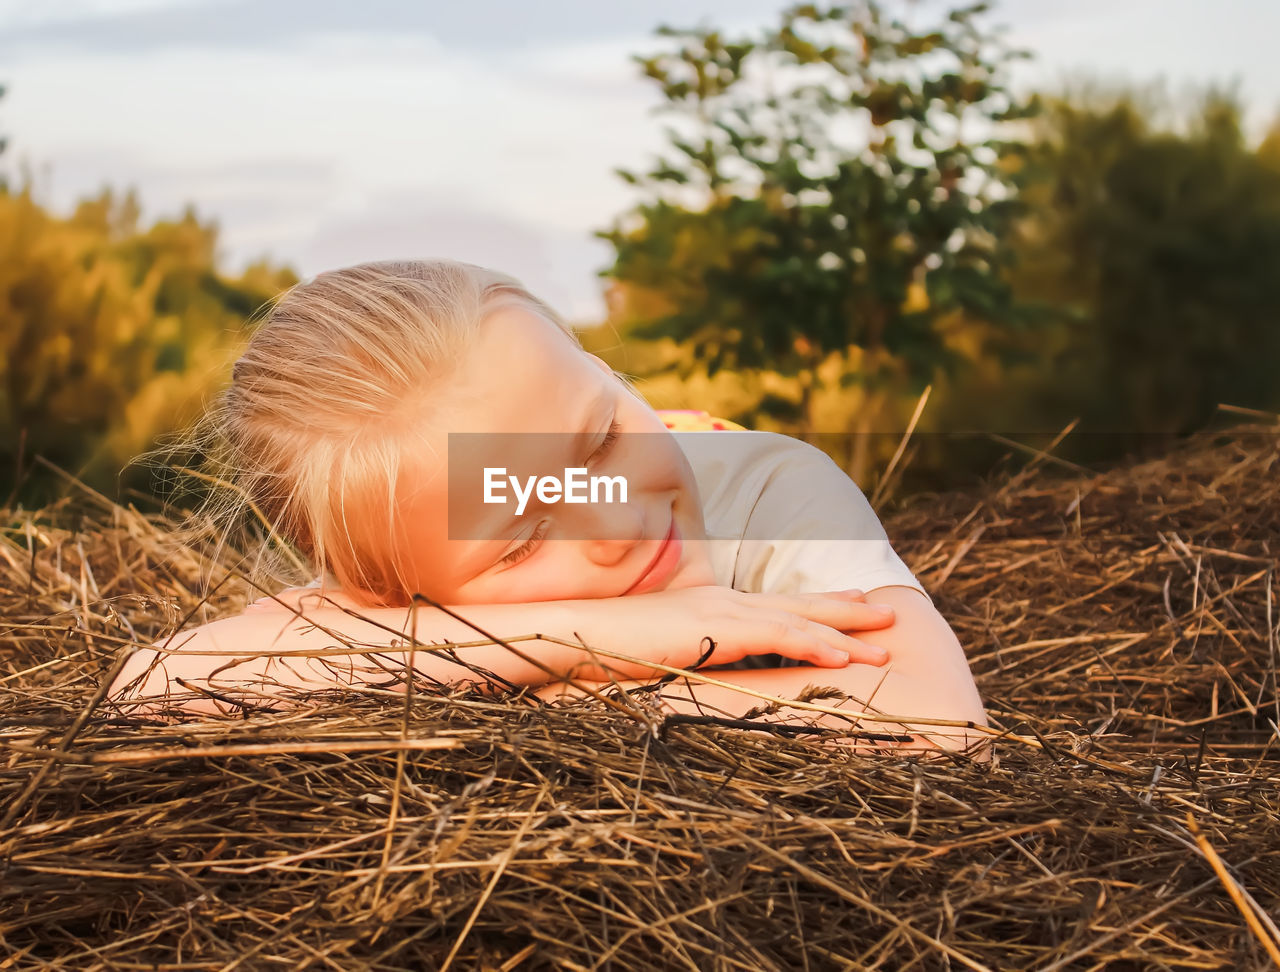 child, one person, baby, childhood, lying down, nature, blond hair, relaxation, plant, toddler, eyes closed, innocence, grass, portrait, portrait photography, cute, autumn, emotion, smiling, day, happiness, outdoors, person, sunlight, summer, headshot, lifestyles, land, sky, sleeping, straw, leisure activity, tranquility, lying on front, resting, men, casual clothing, field